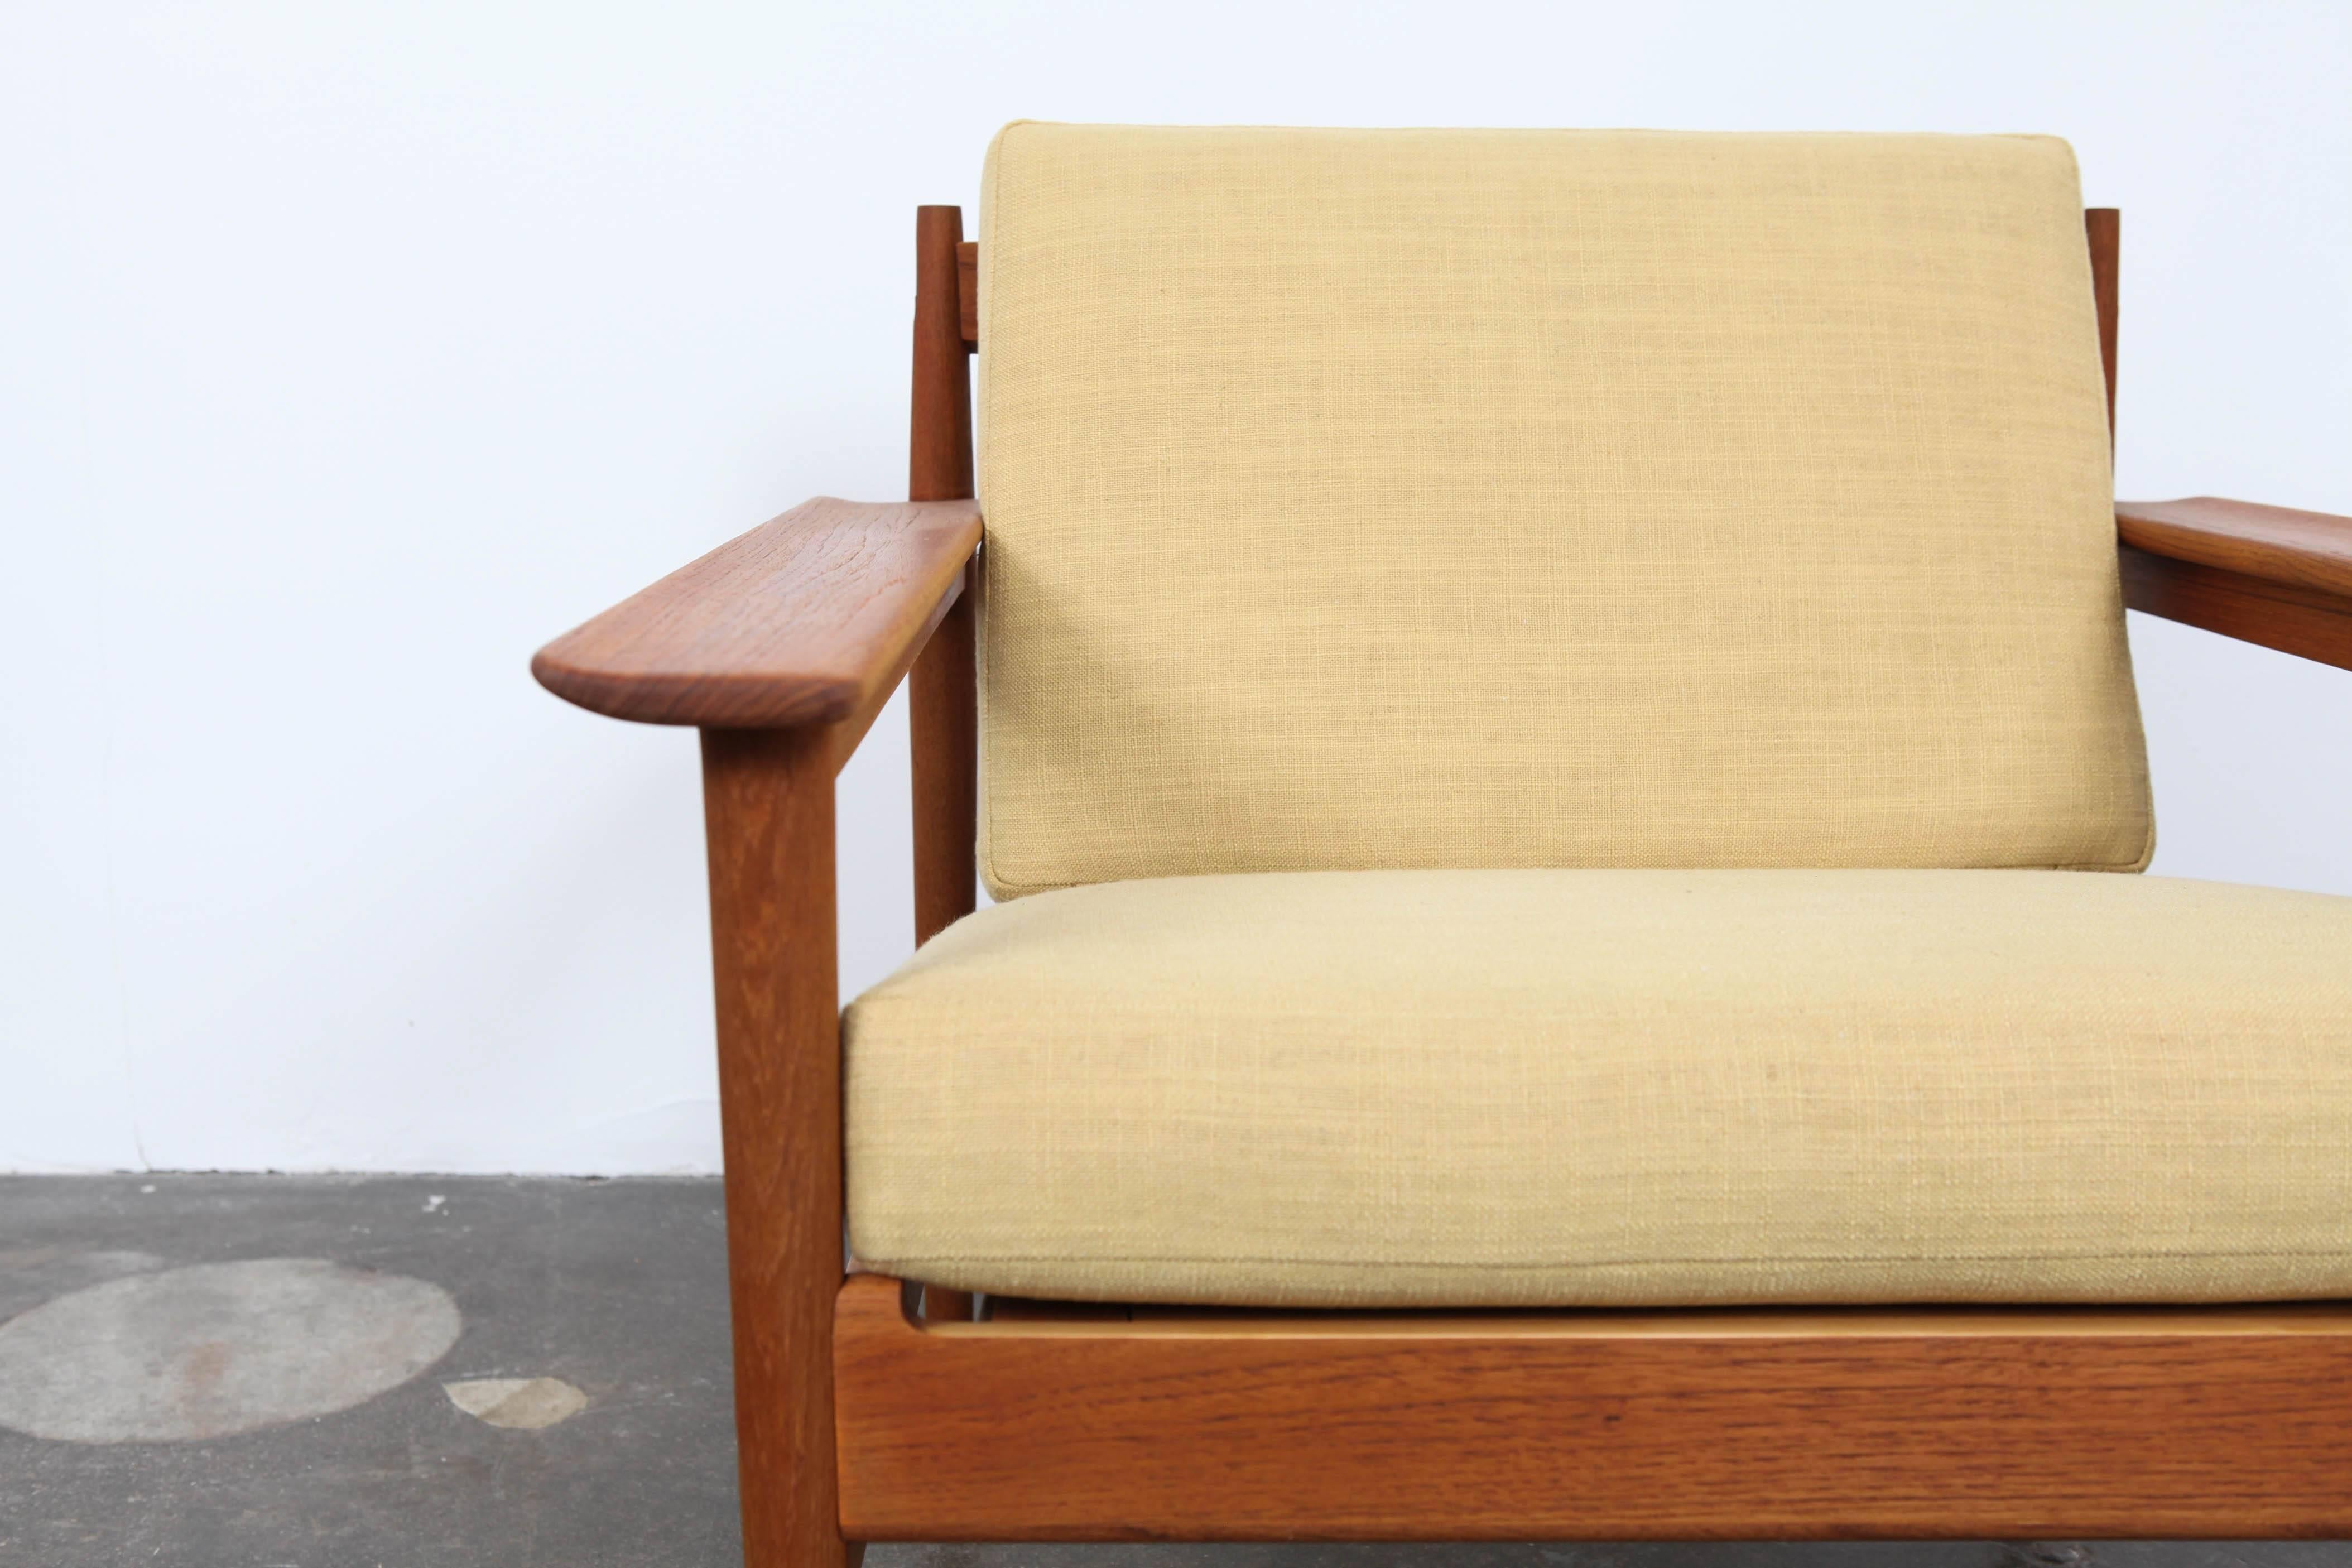 Pair of Swedish open-frame teak lounge chairs with slatted backs, round tapered legs and loose cushions. These chairs have been newly refinished and reupholstered in a soft yellow linen fabric.